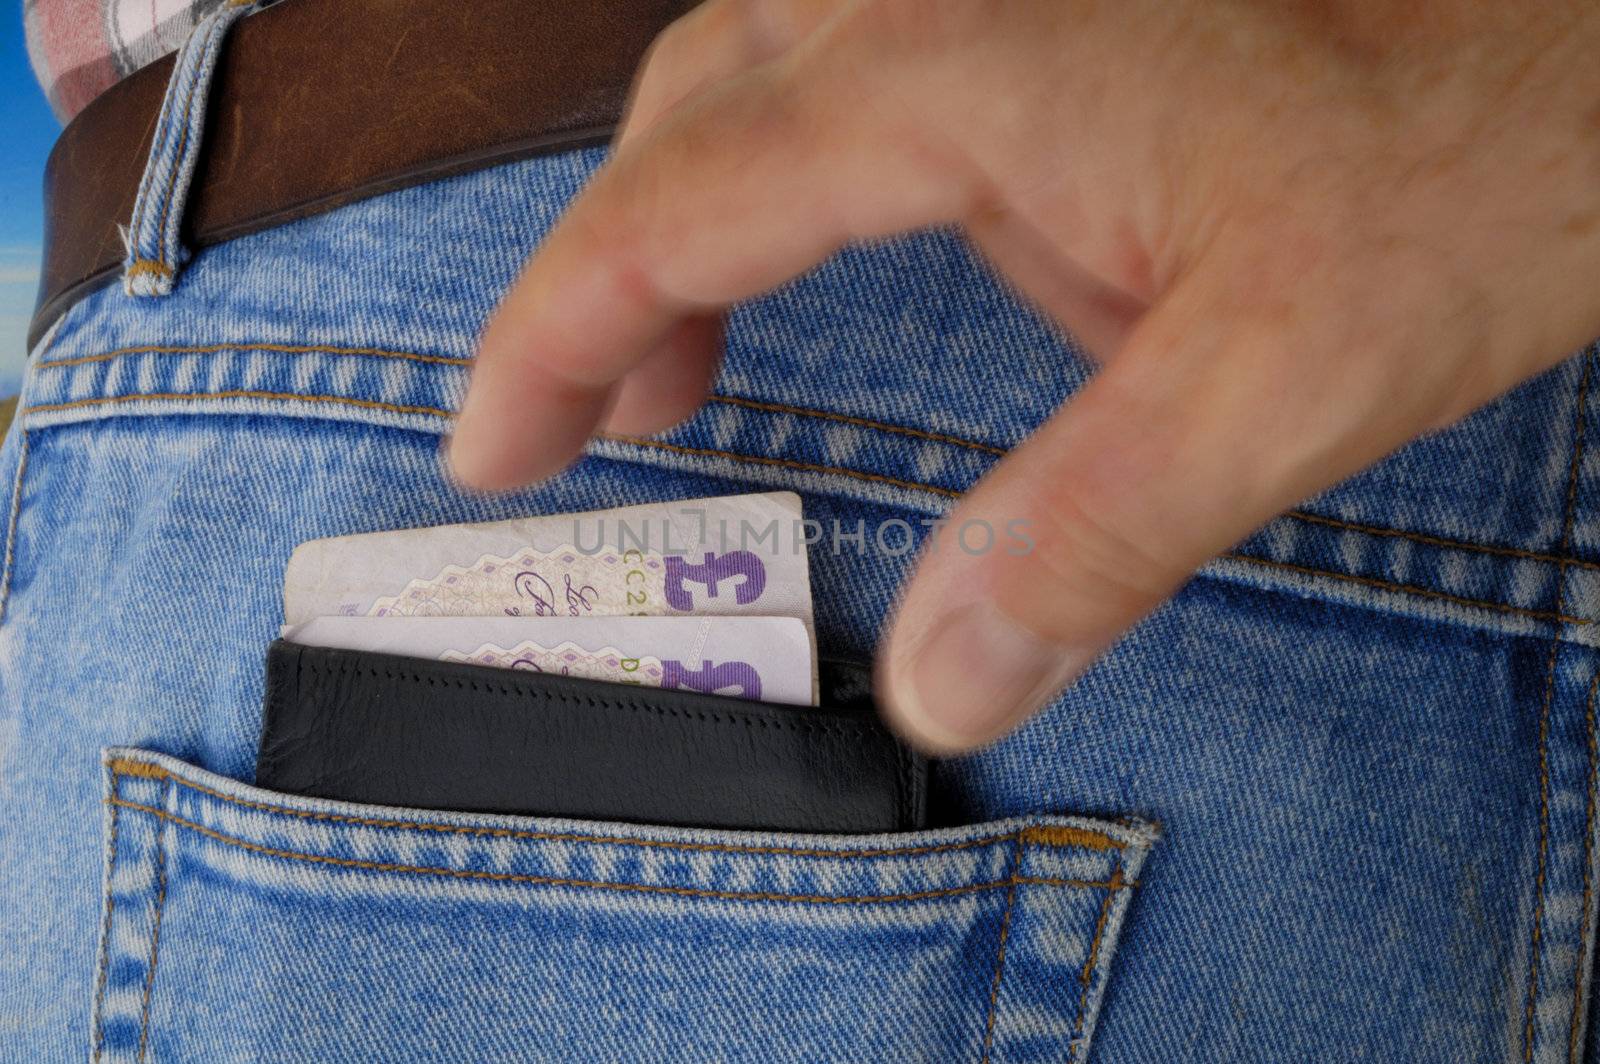 Pickpocket in action - Wallet. by Bateleur